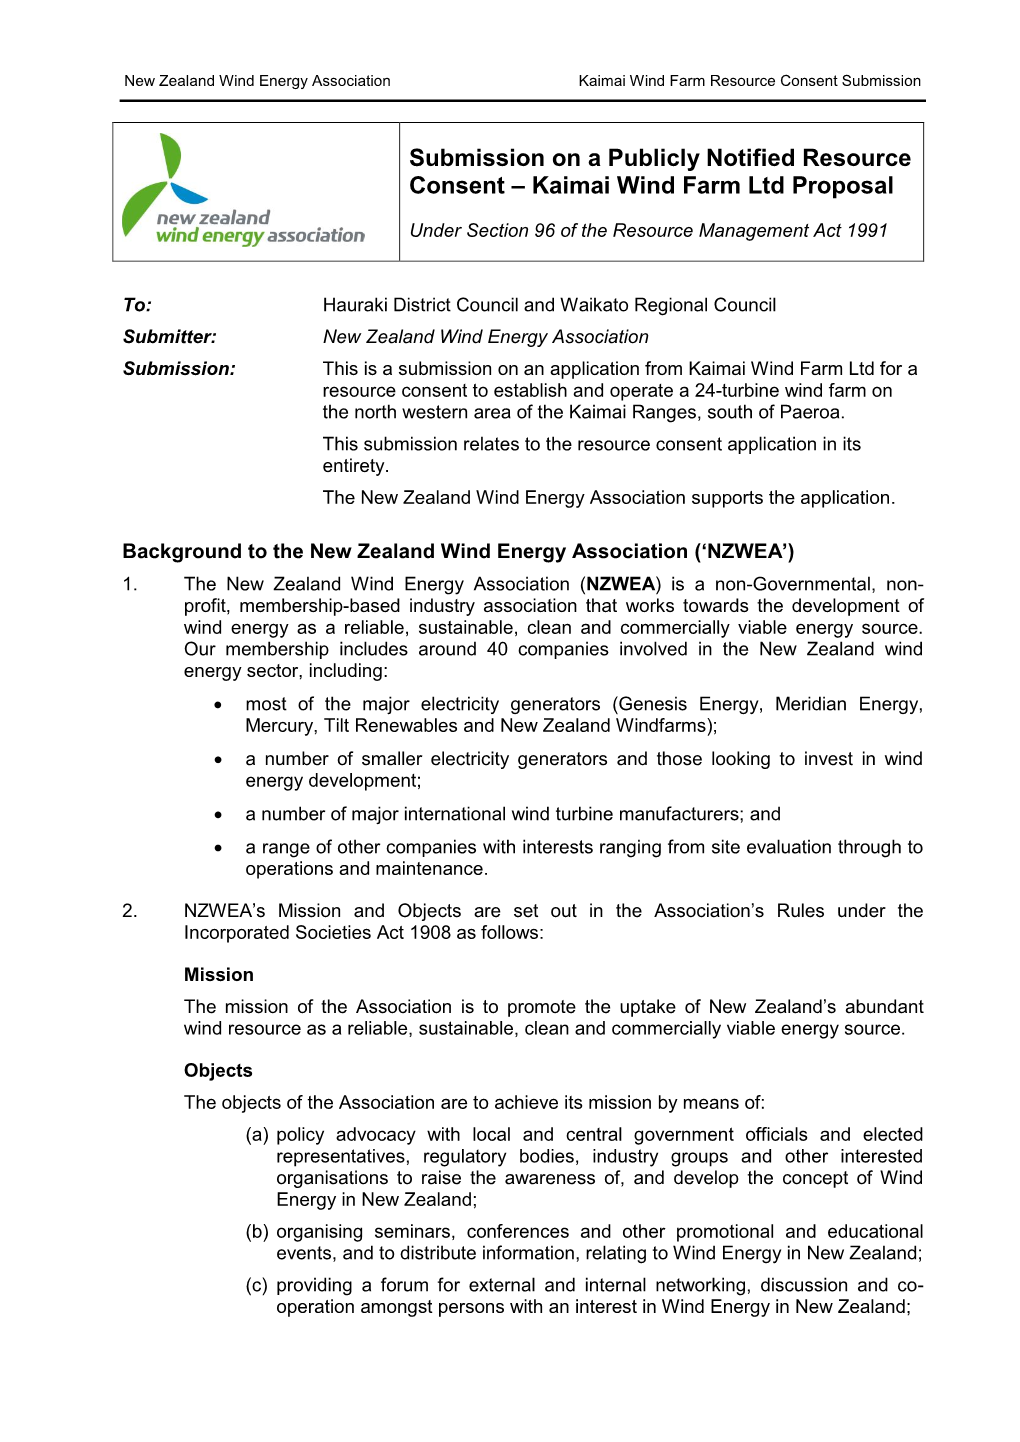 Submission on a Publicly Notified Resource Consent – Kaimai Wind Farm Ltd Proposal